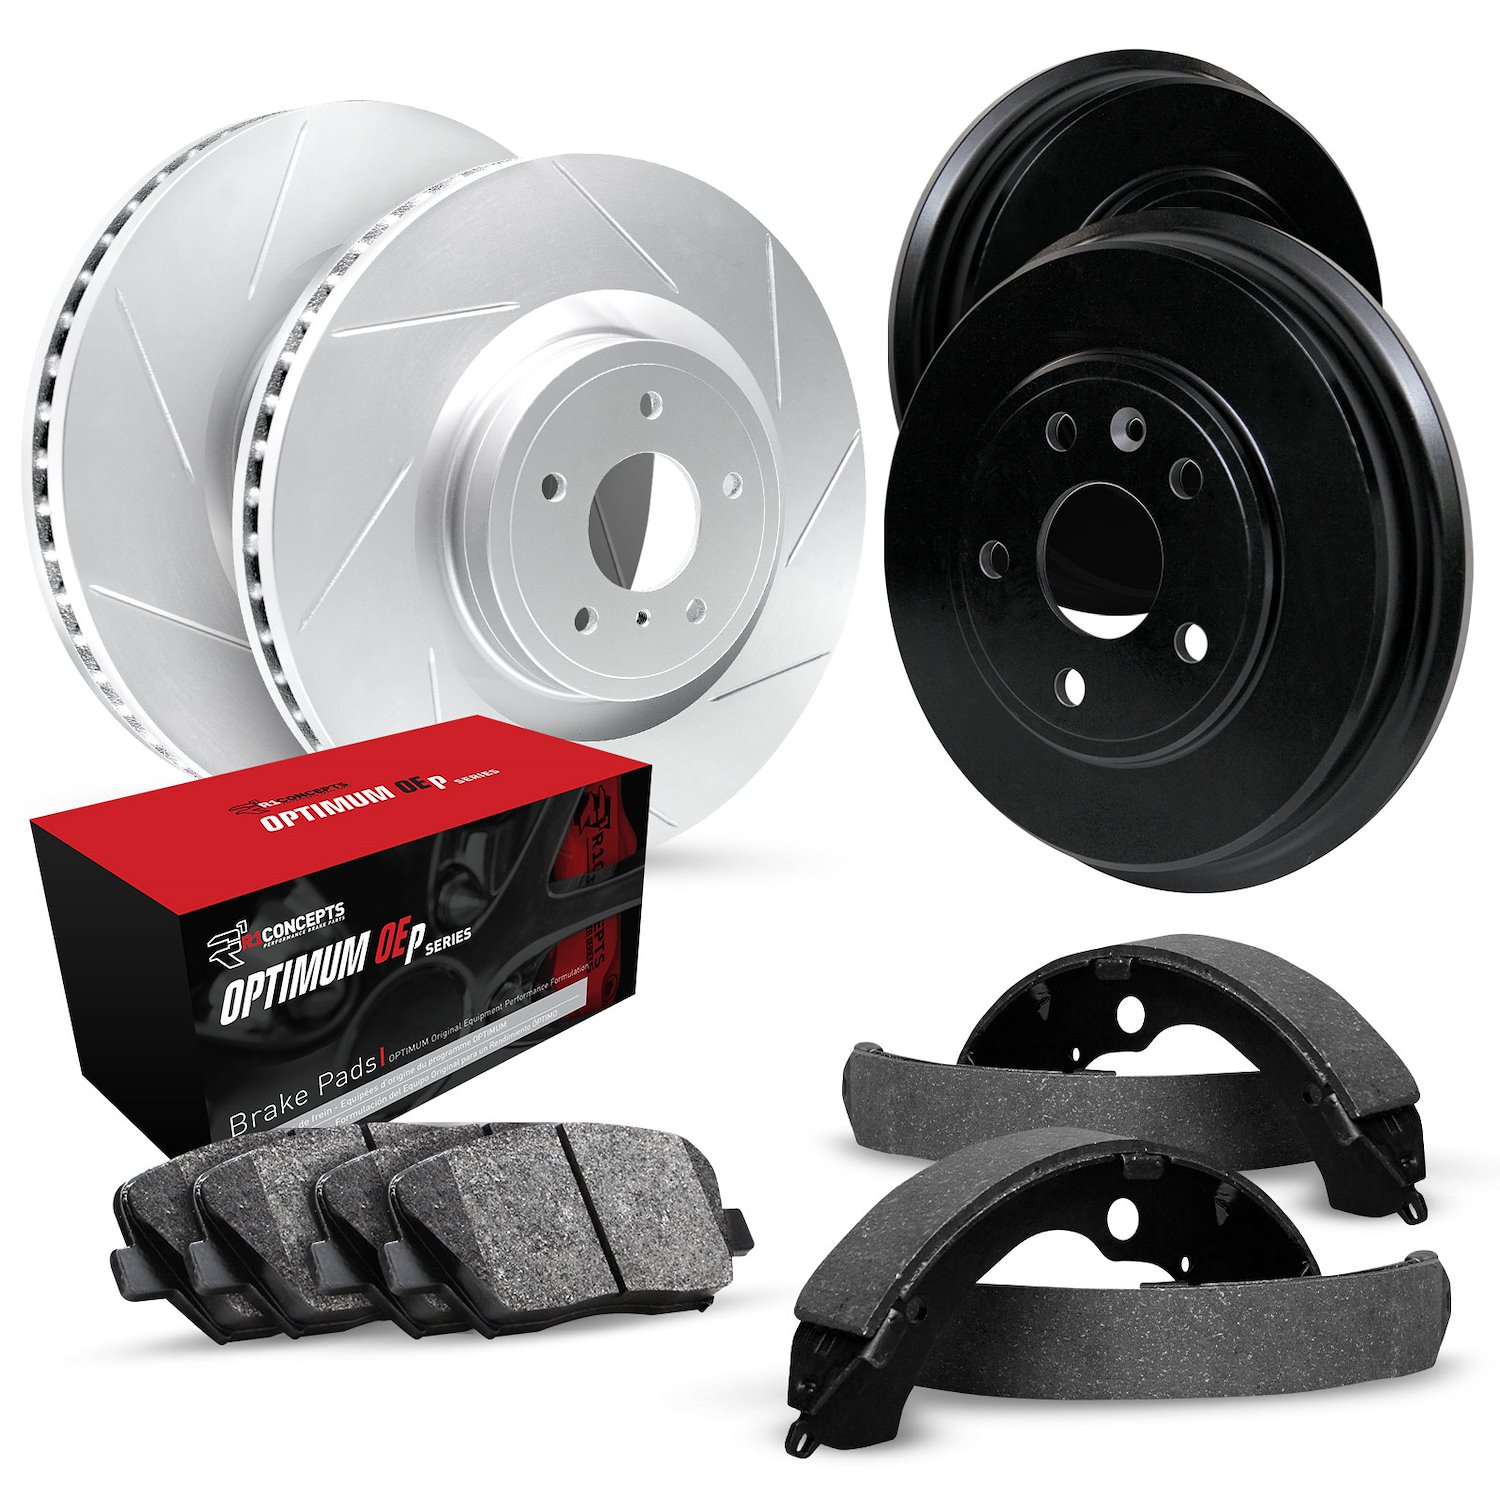 GEO-Carbon Slotted Brake Rotor & Drum Set w/Optimum OE Pads & Shoes, 1994-1996 Ford/Lincoln/Mercury/Mazda